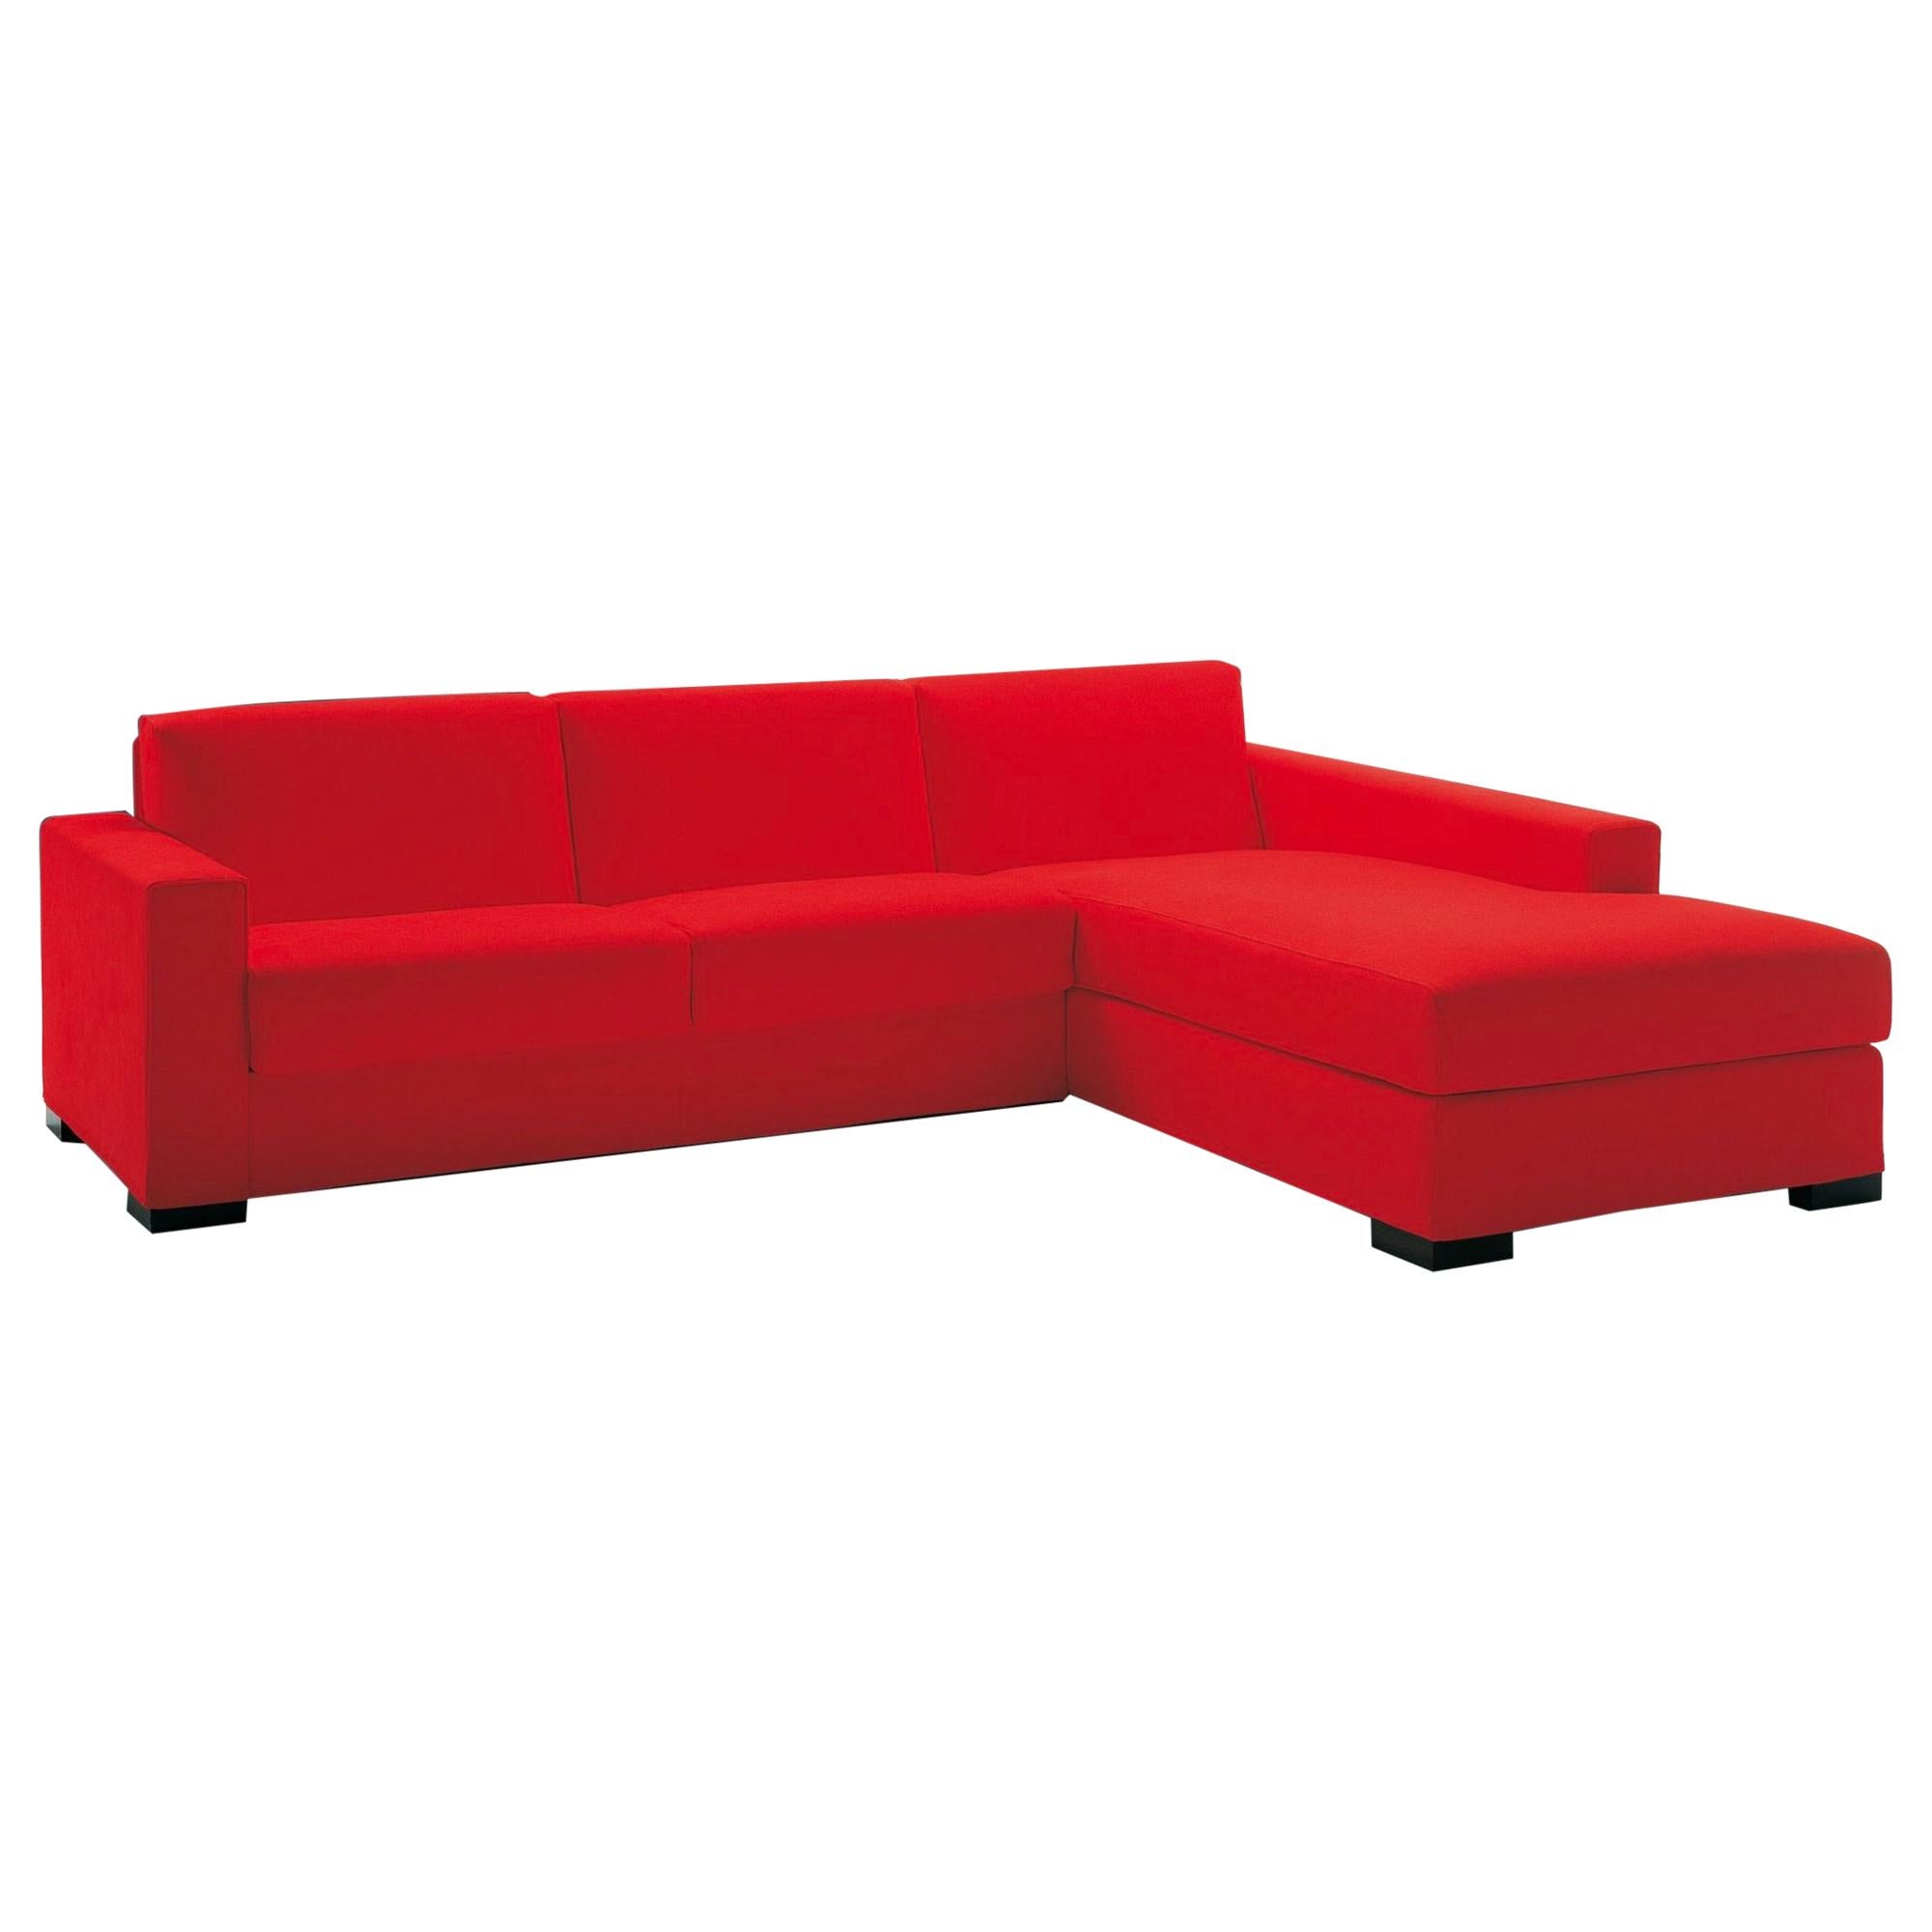 Contemporary Italian Sofa Bed with Chaise Lounge and Storage Space, New For Sale